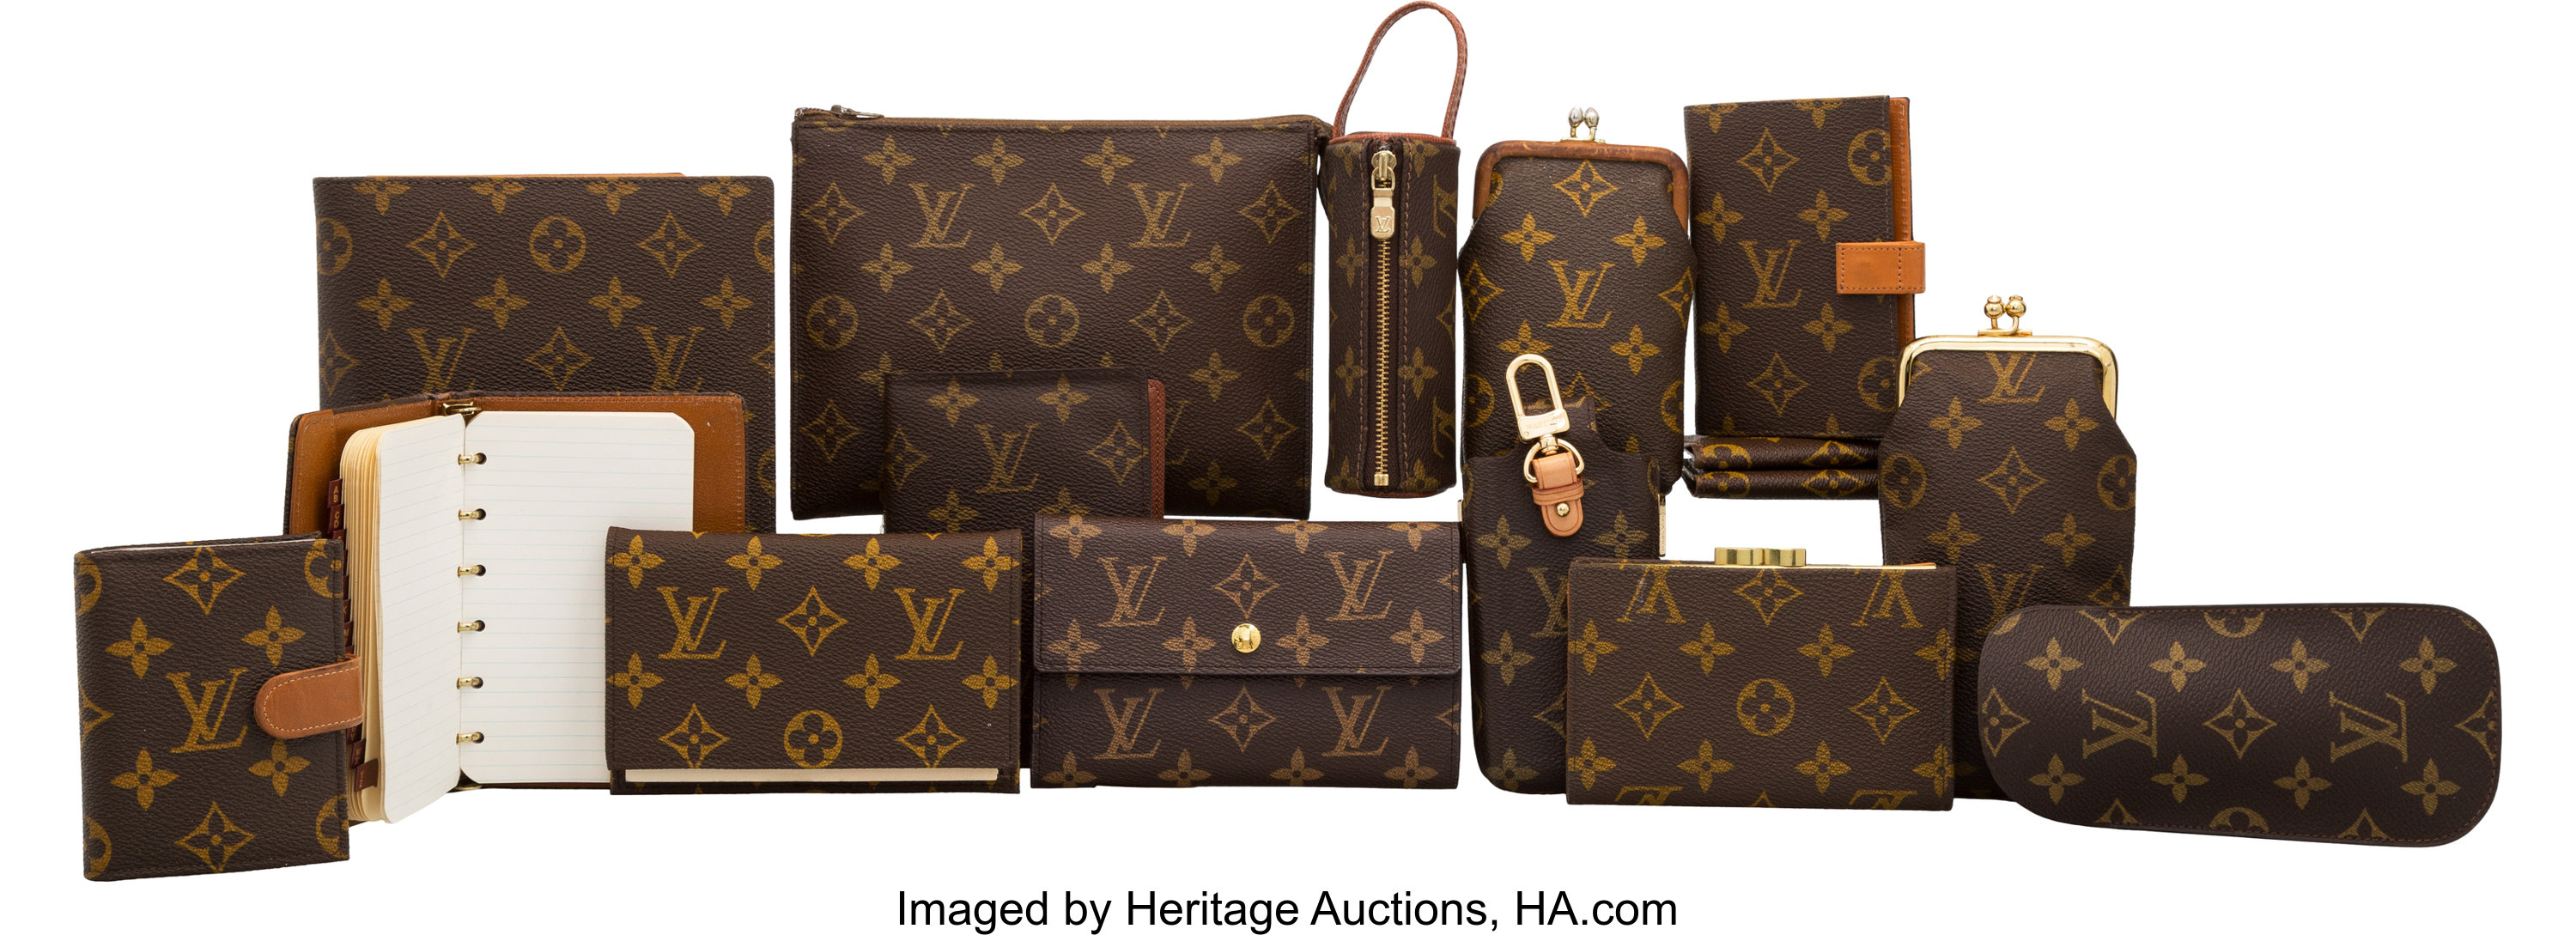 Louis Vuitton: Current Performance And 2019 Outlook (OTCMKTS:LVMUY)